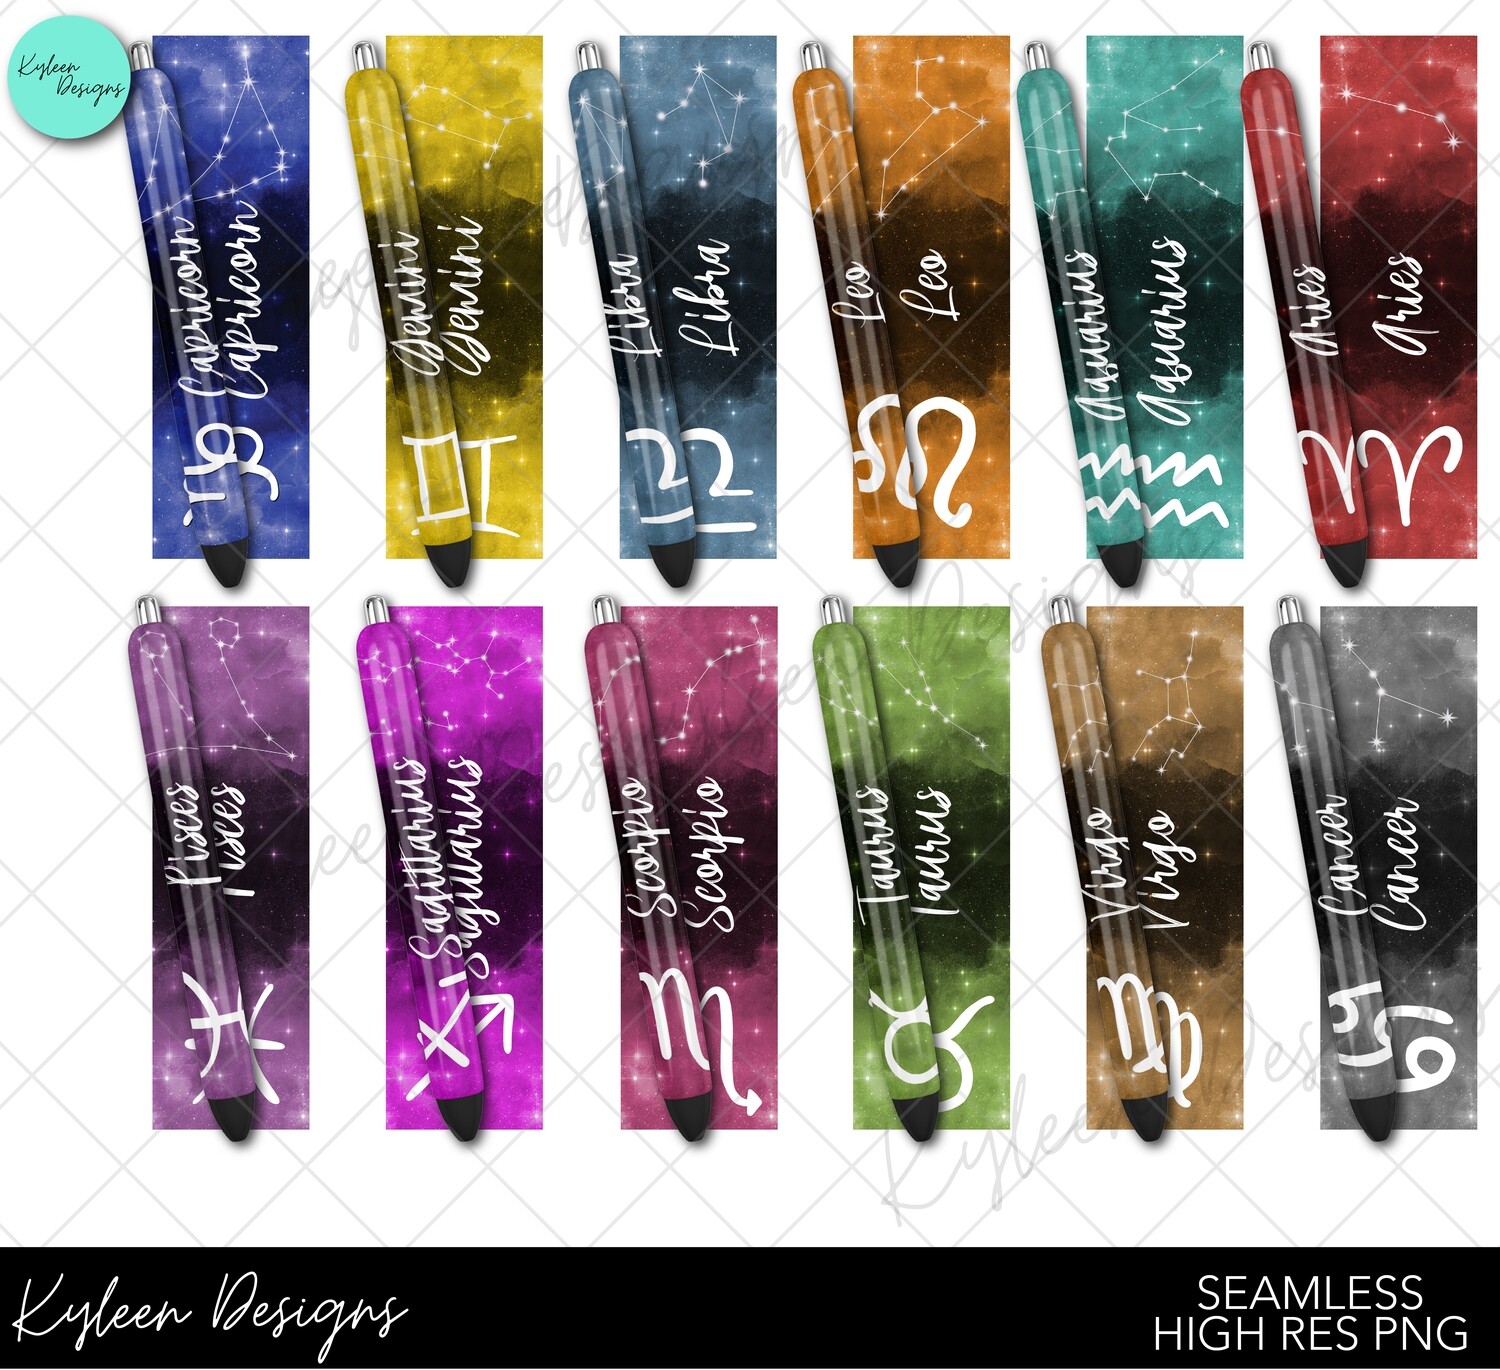 zodiac pen wrappers™  for waterslide High Res PNG file